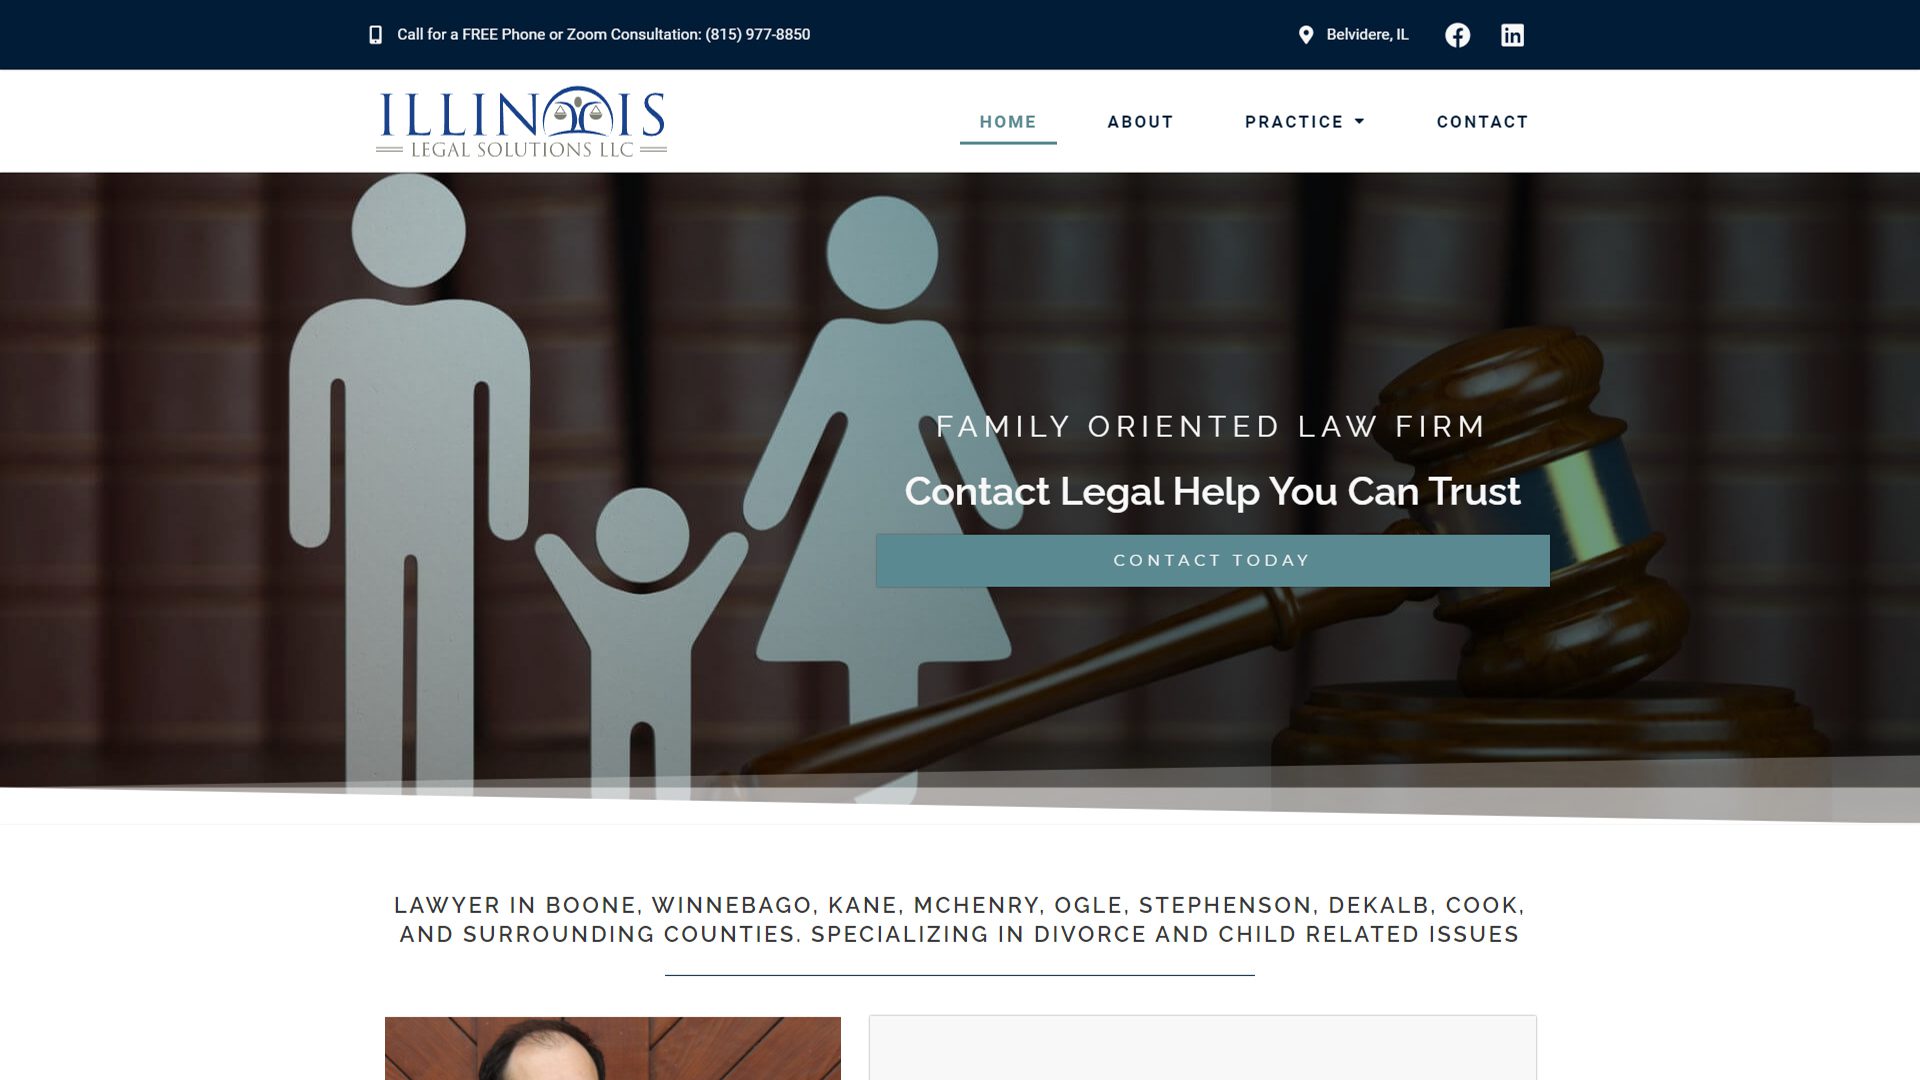 Screenshot of Illinois Legal Solutions website.